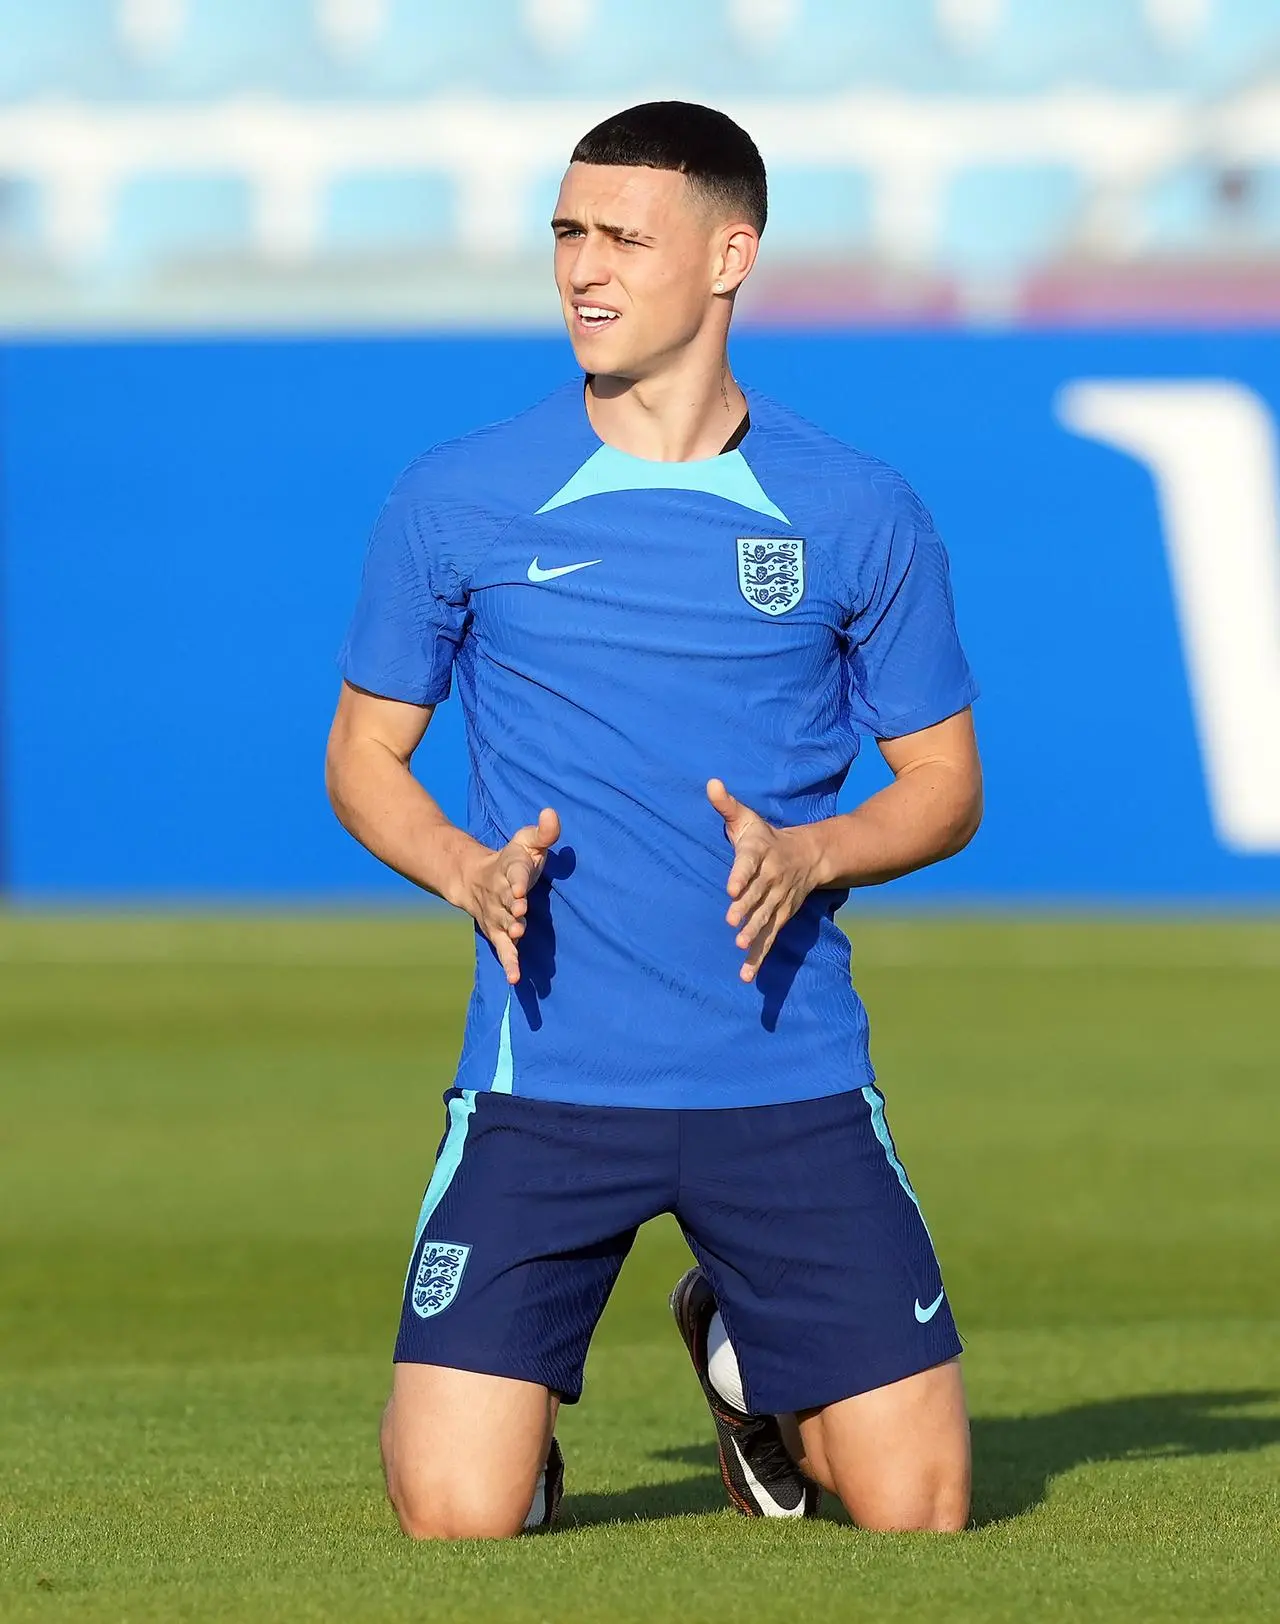 England boss Gareth Southgate wants to protect Phil Foden